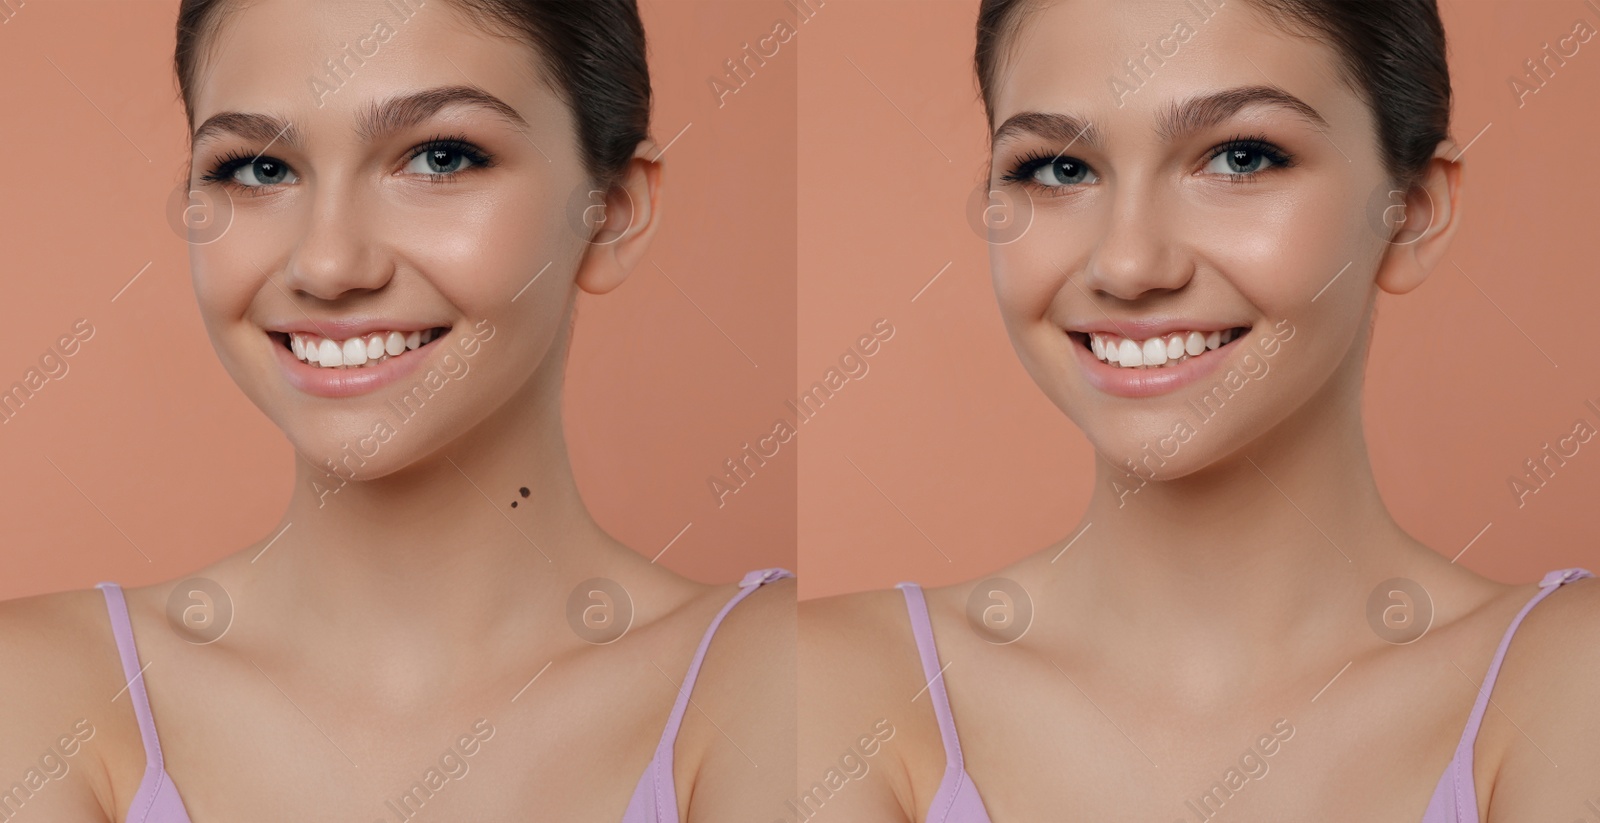 Image of Mole removal. Collage with photos of teenage girl before and after procedure on coral background